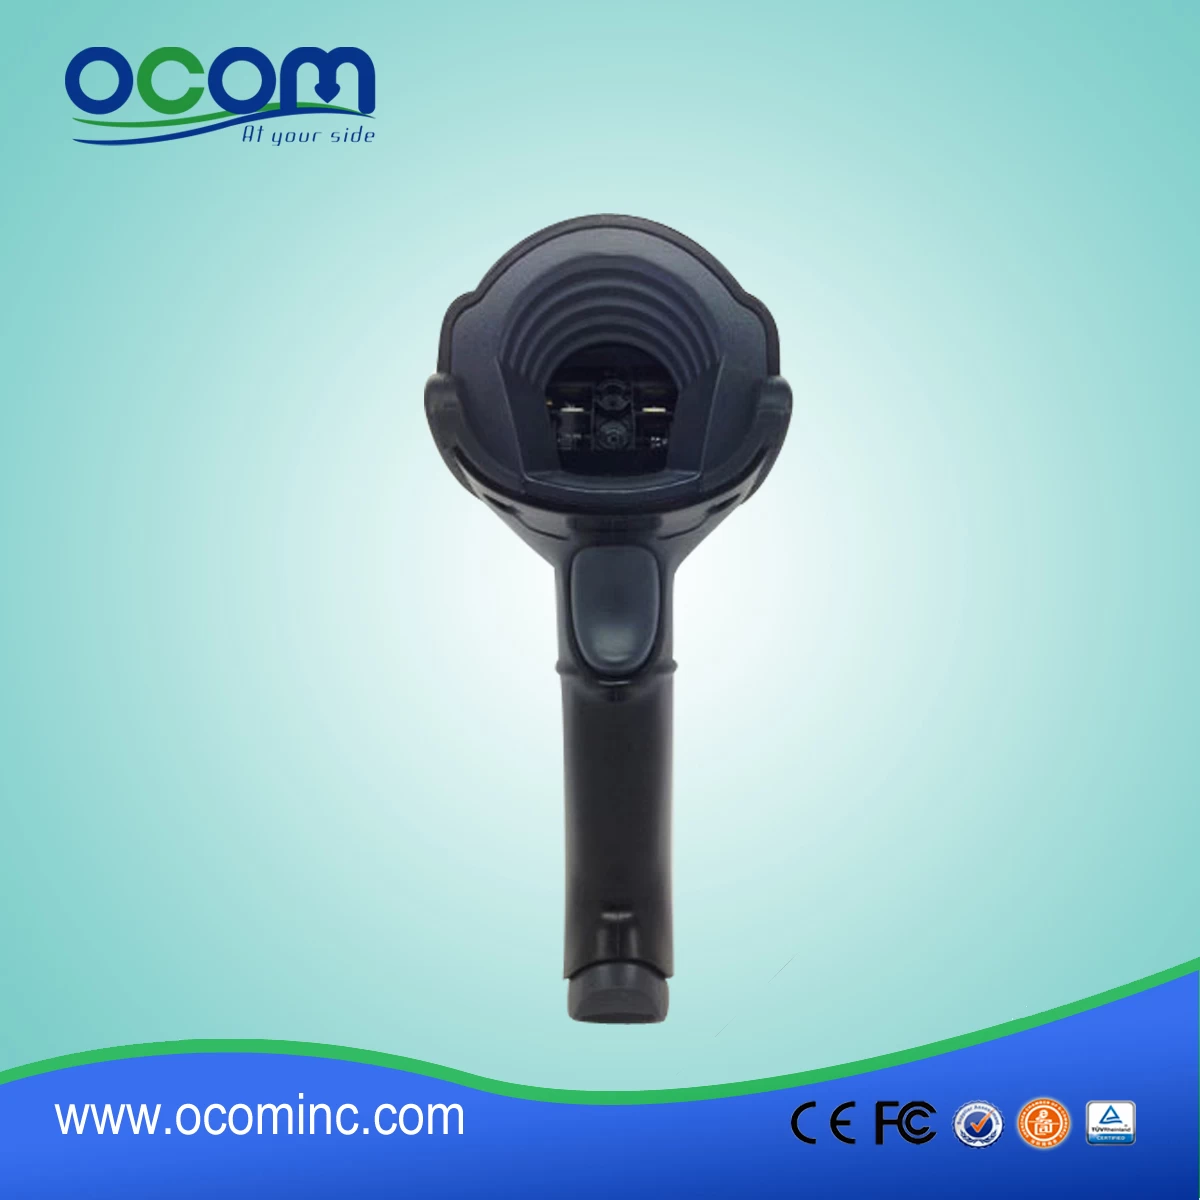 China made low cost handheld 2D barcode scanner-OCBS-2006